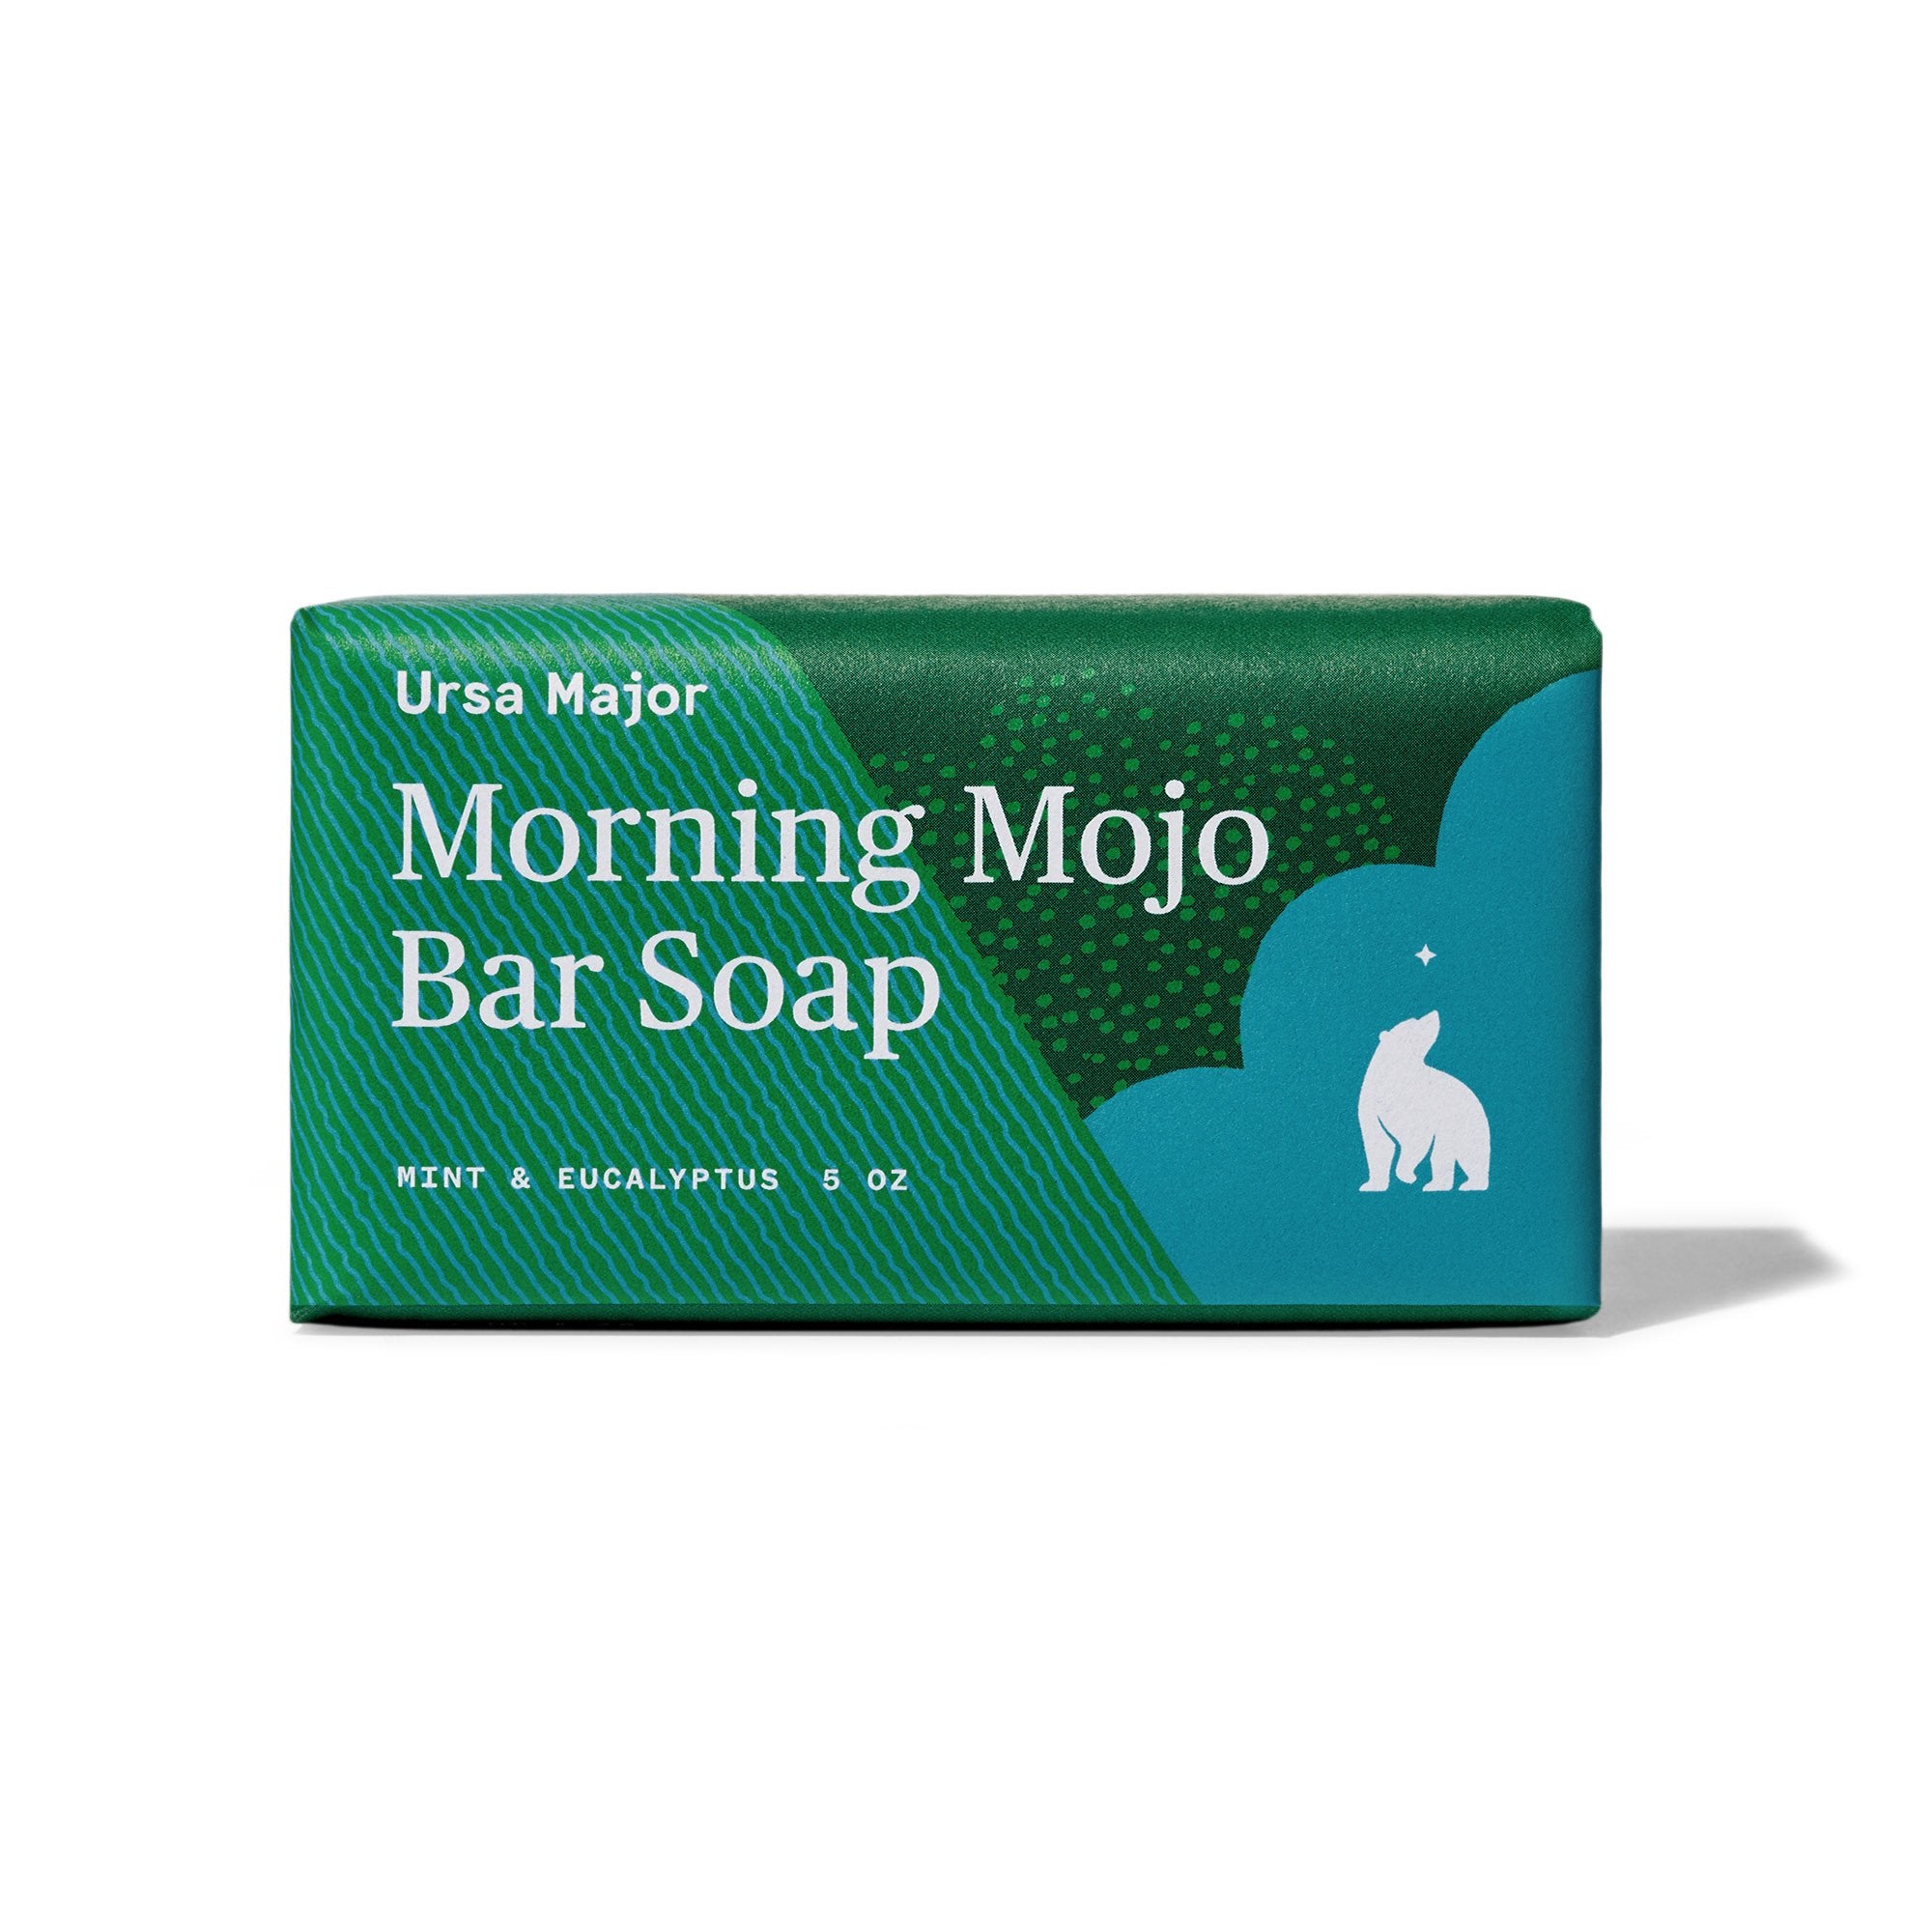 Why You Should Shower With Bar Soaps - Furthermore